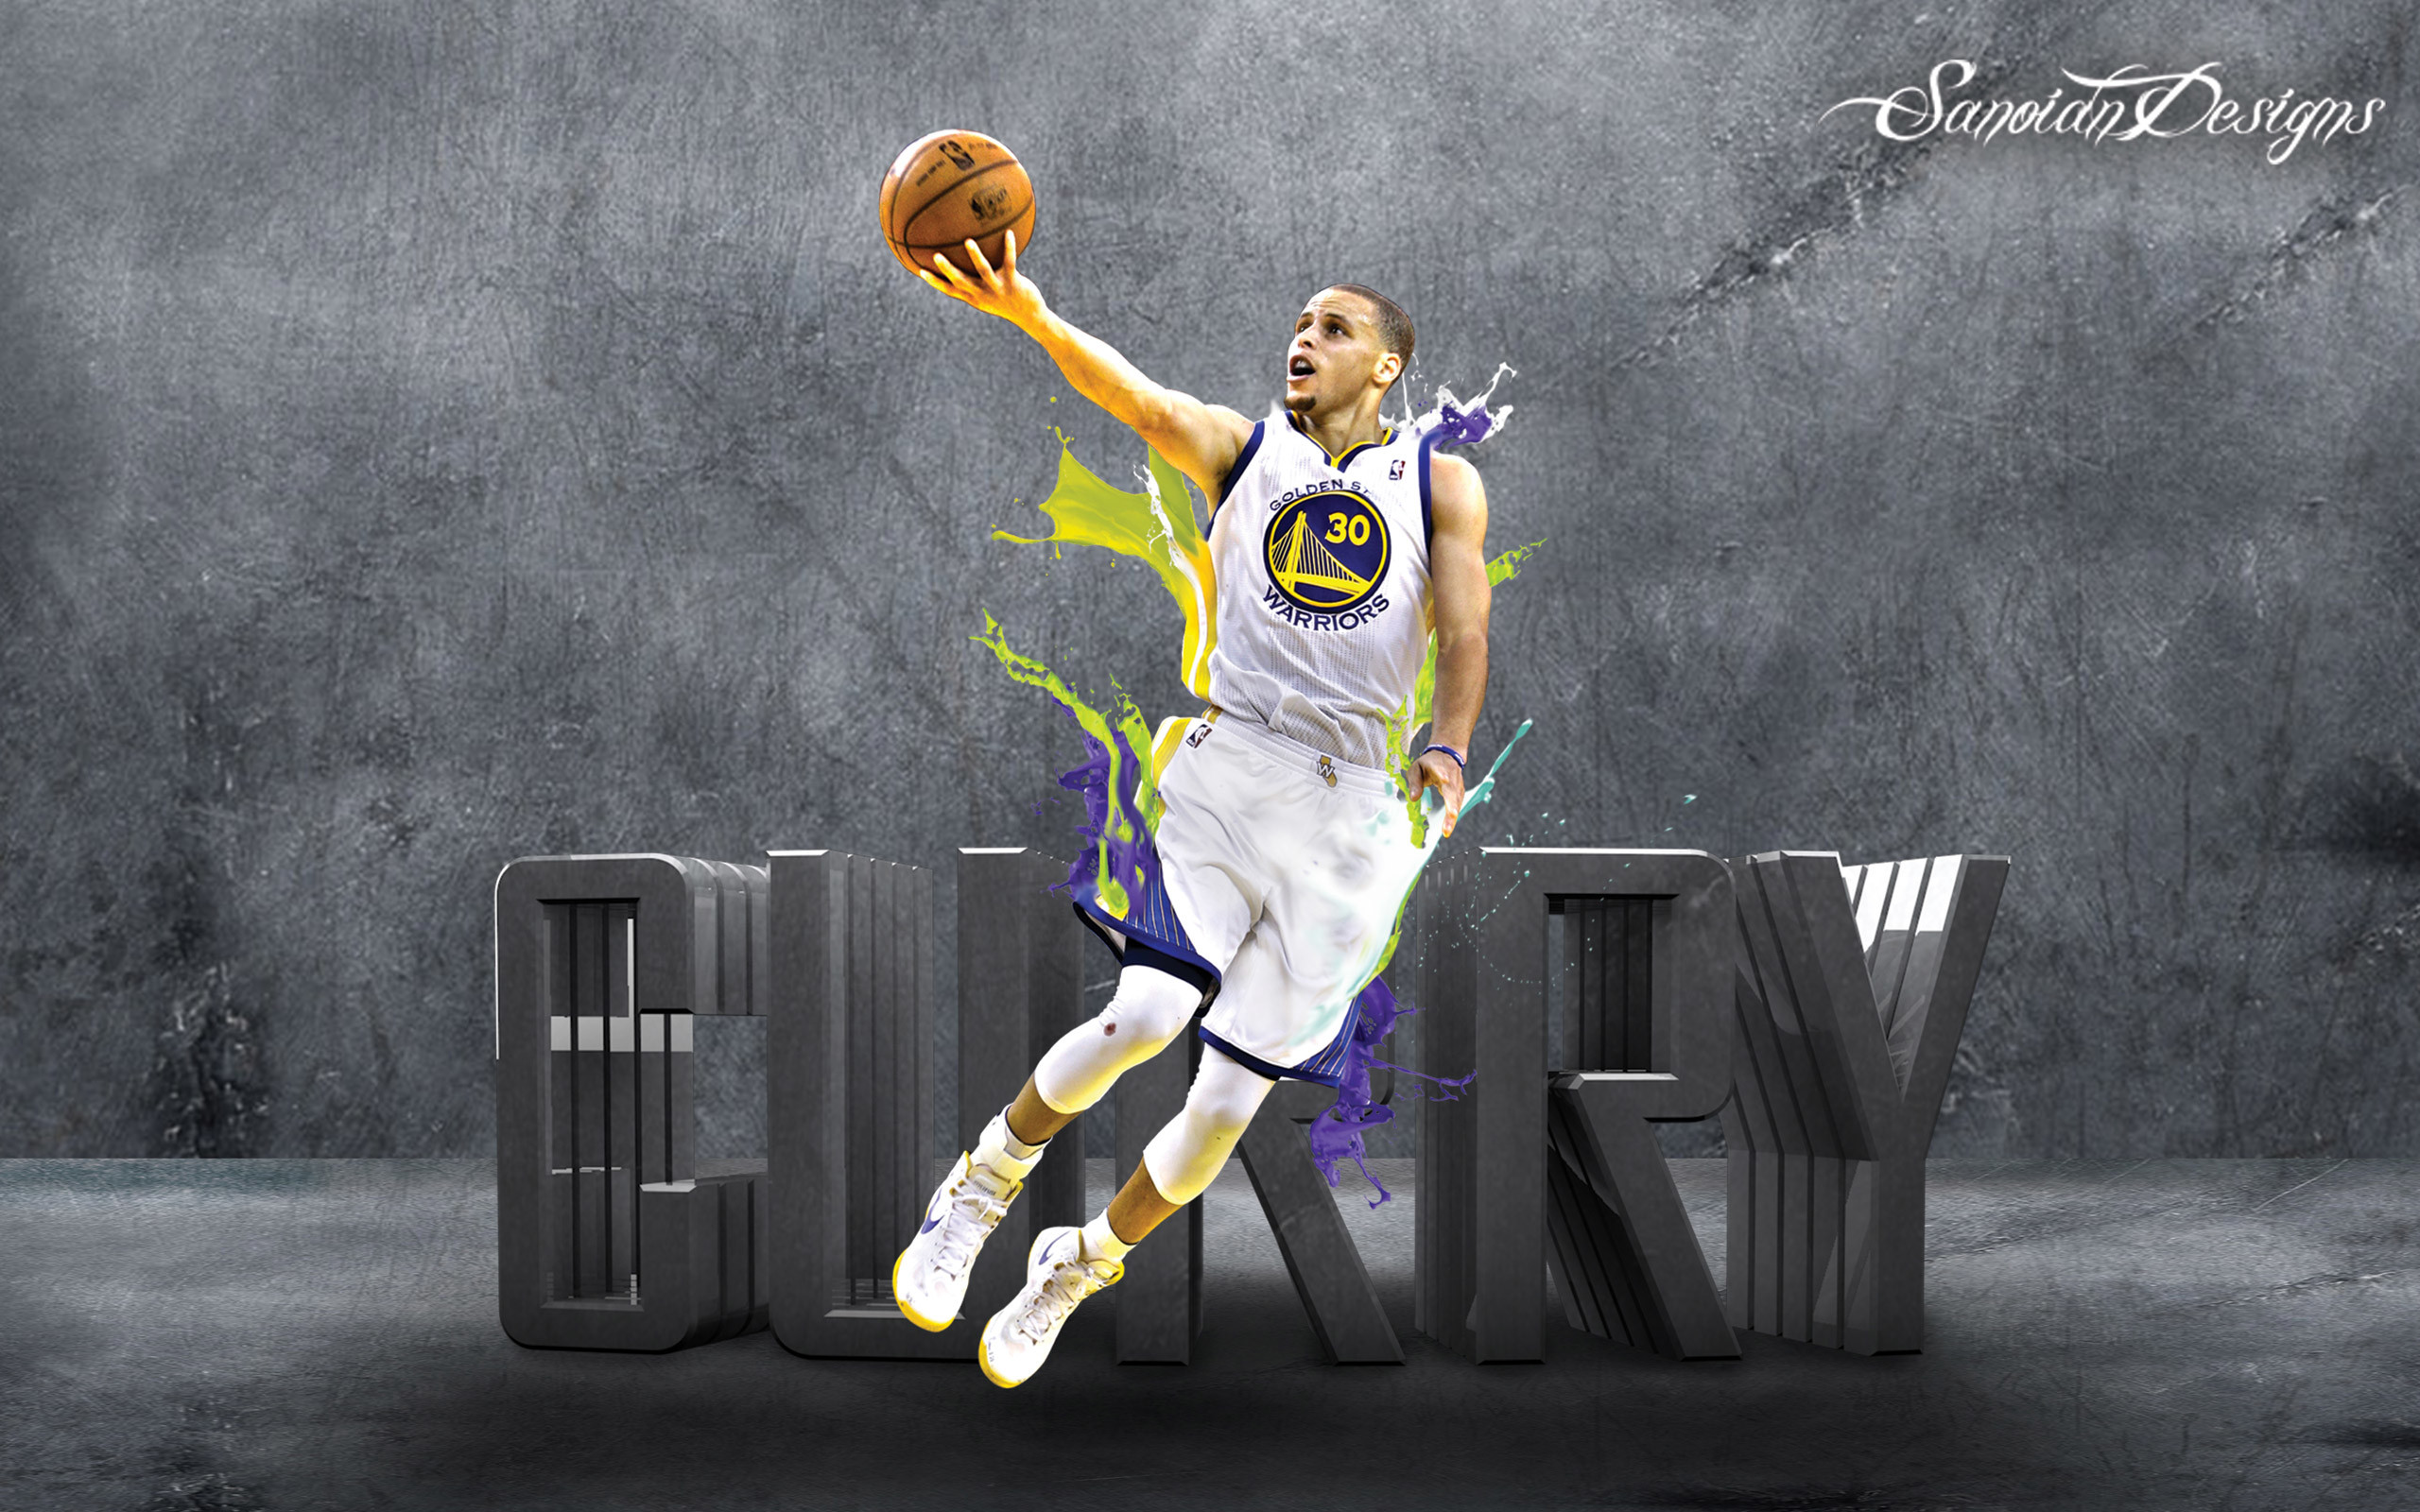 Stephen Curry wallpaper 2014 Download – Stephen Curry wallpaper .